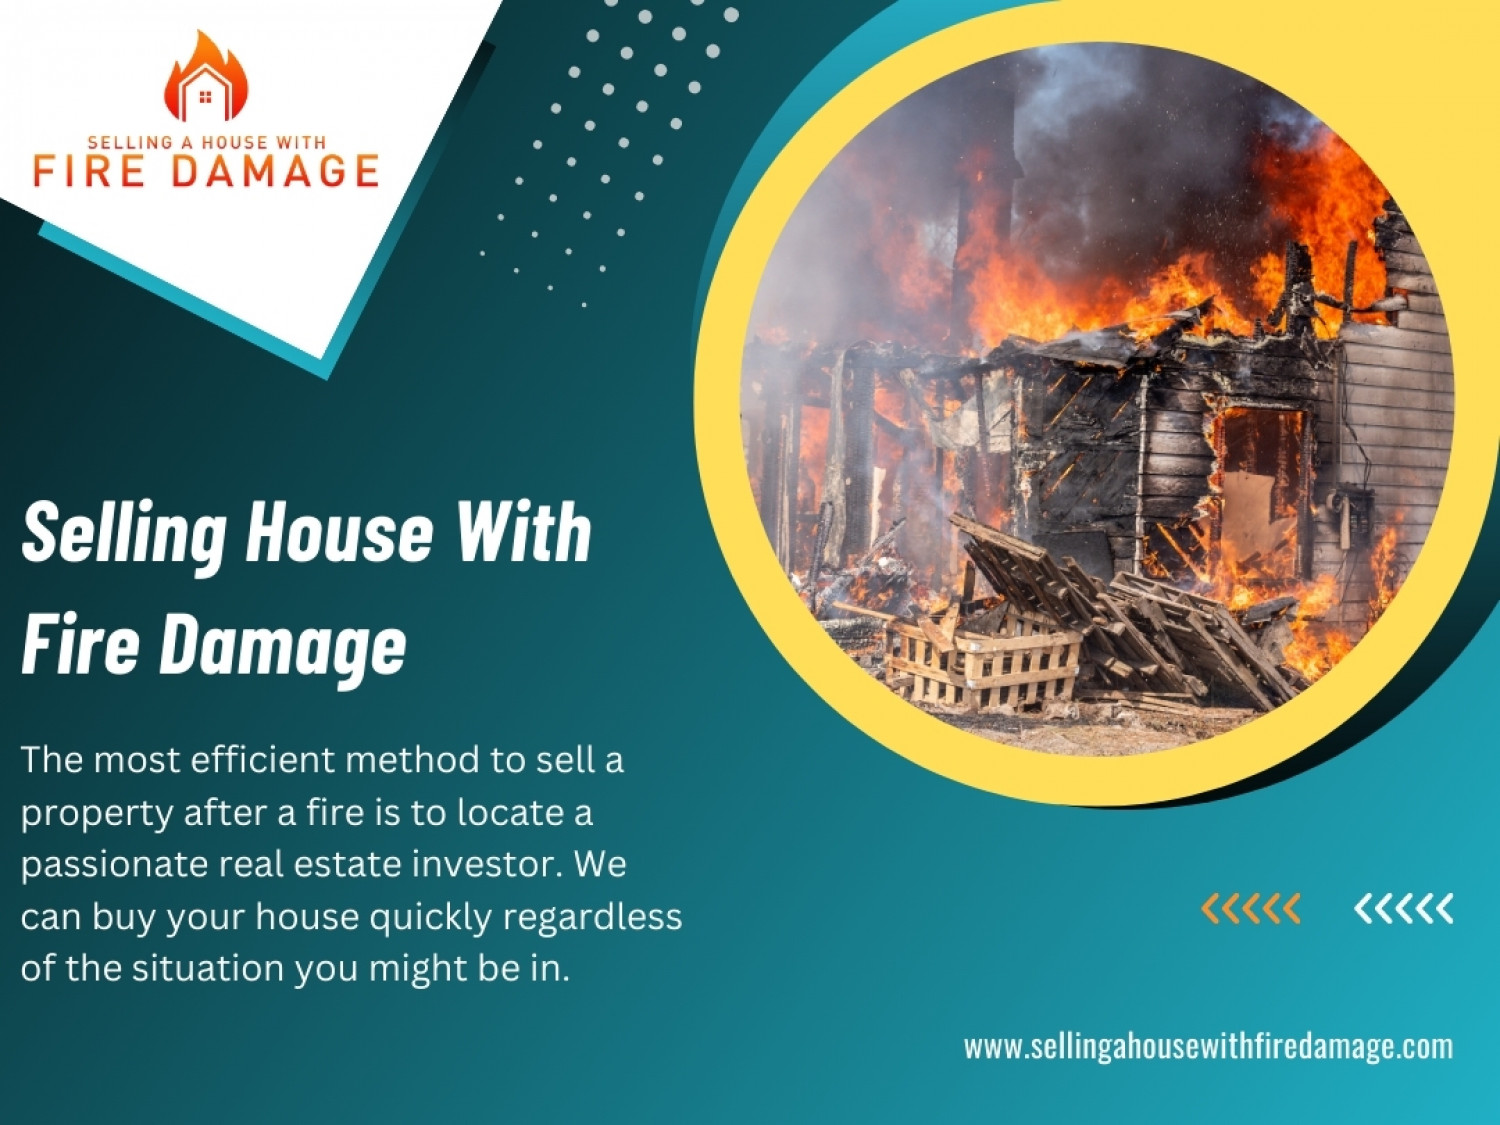 Selling a House With Fire Damage Infographic